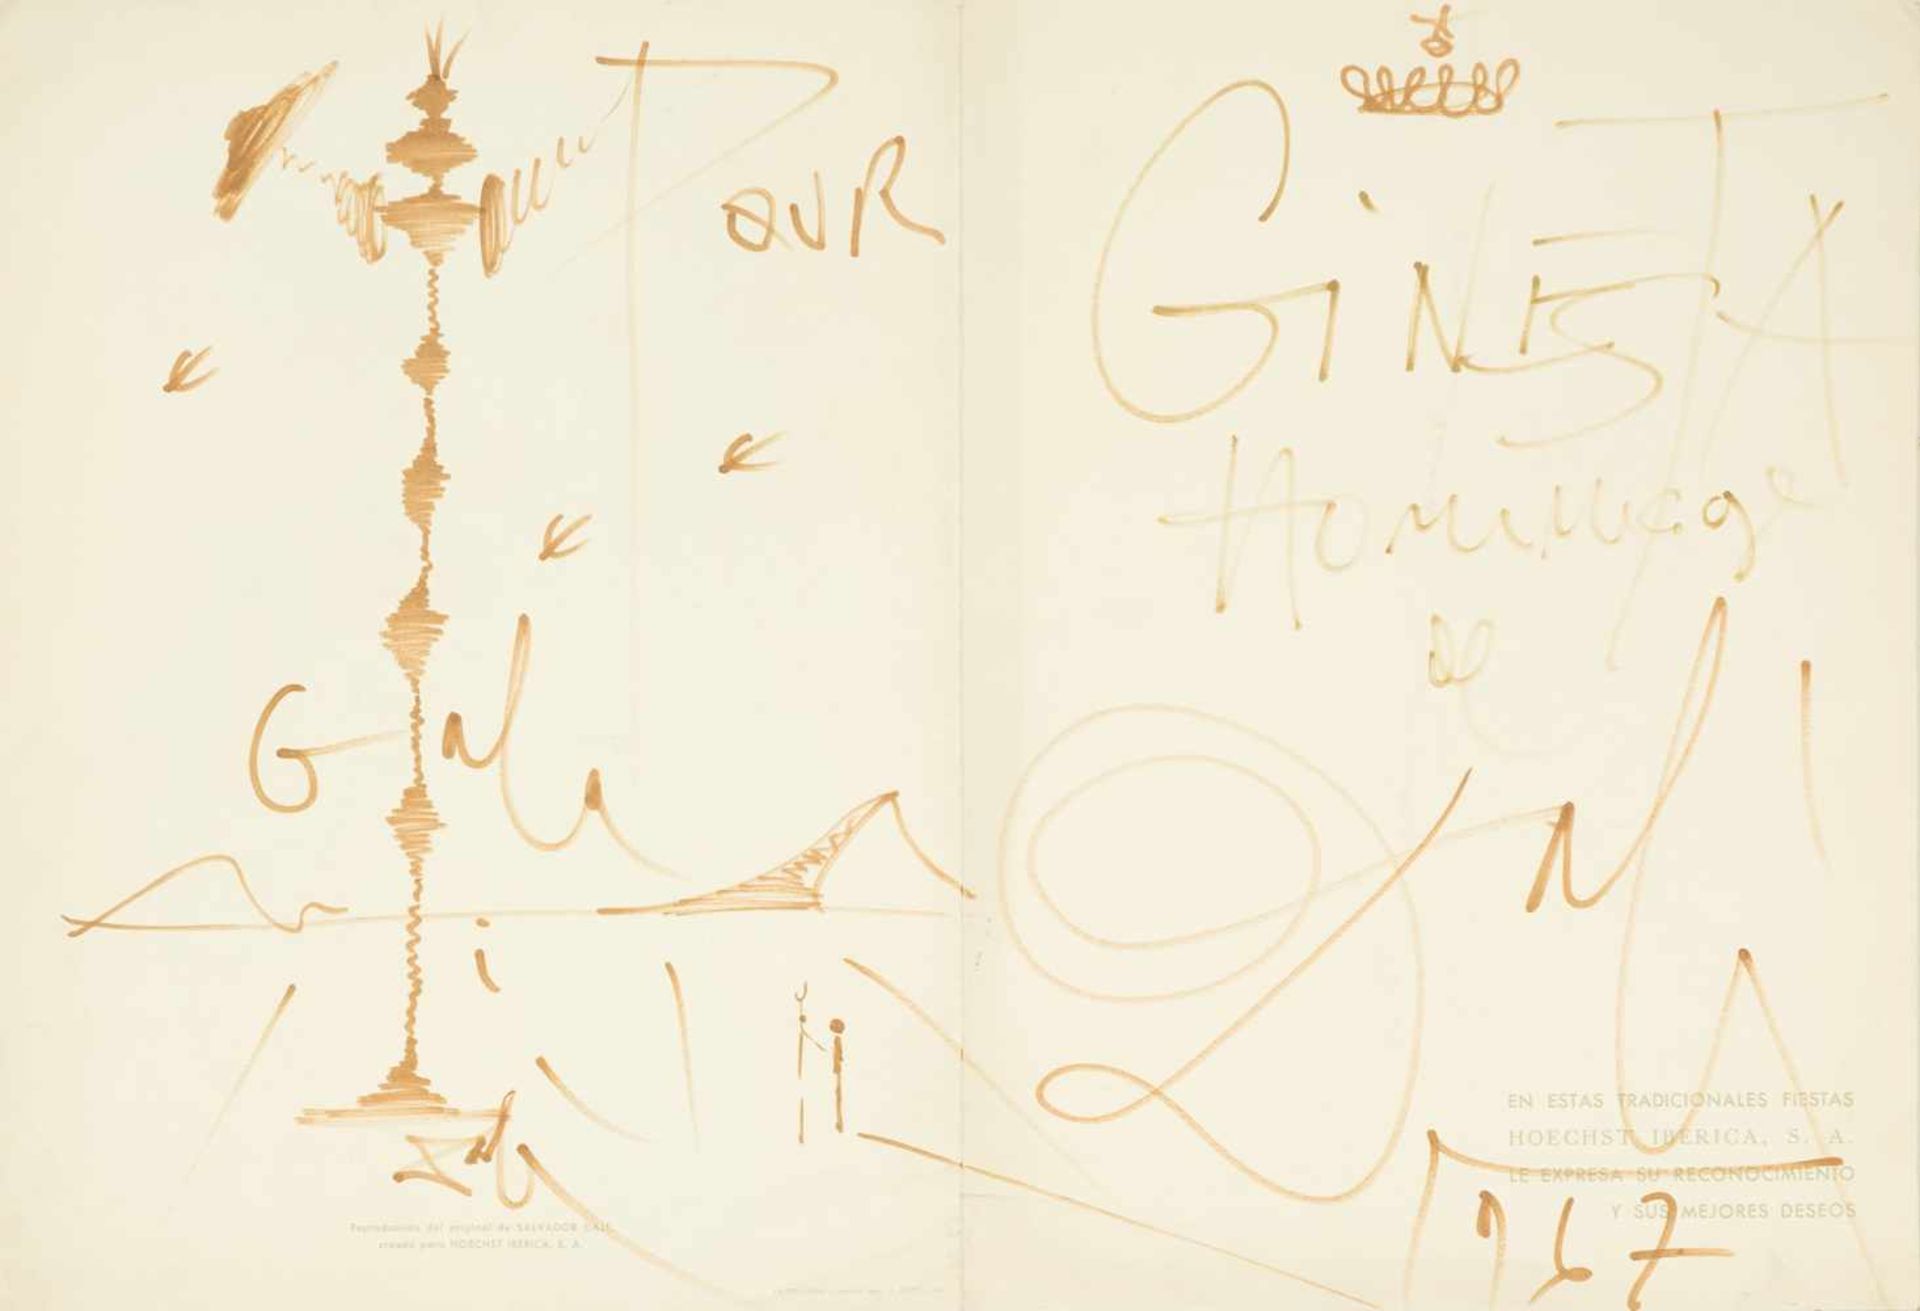 Salvador Dalí (Figueres, 1904 - 1989) Felt-tip pen drawing on paper. Signed and dated in 1967. Drawn